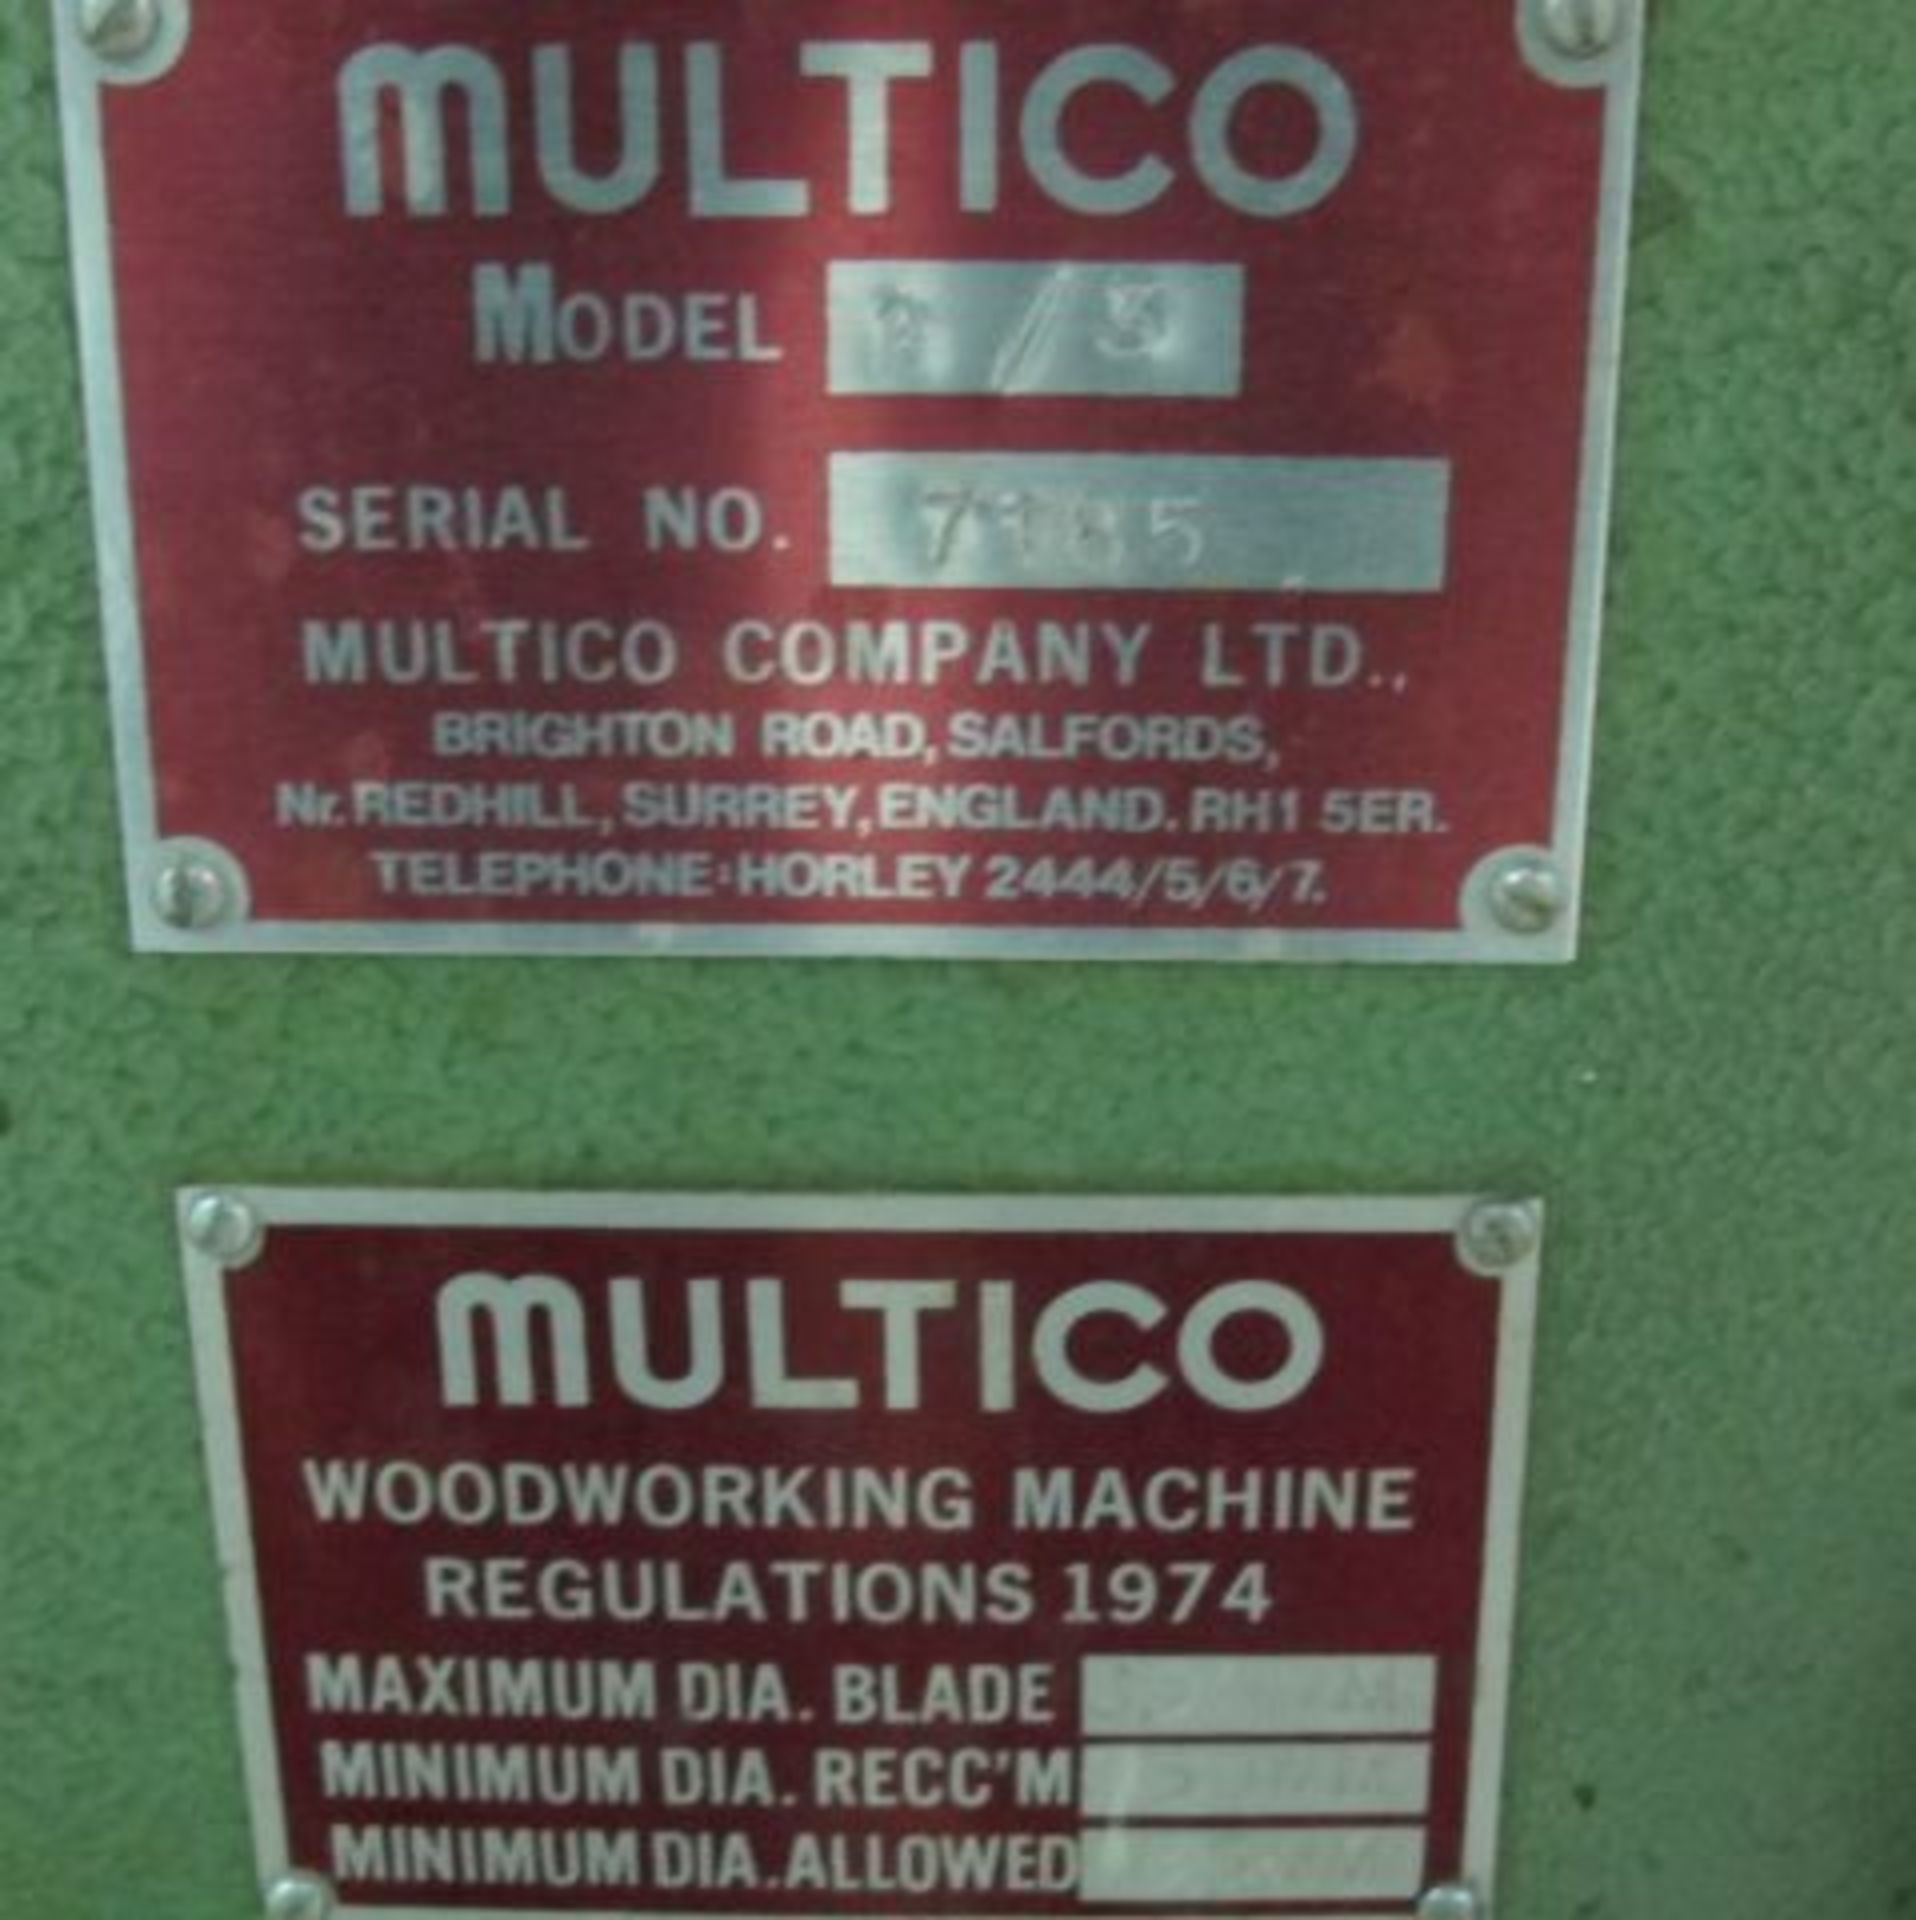 * Multico Model A/3 Circular Saw Bench; max blade diameter 300mm; serial number 7185; 3 phase - - Image 2 of 2